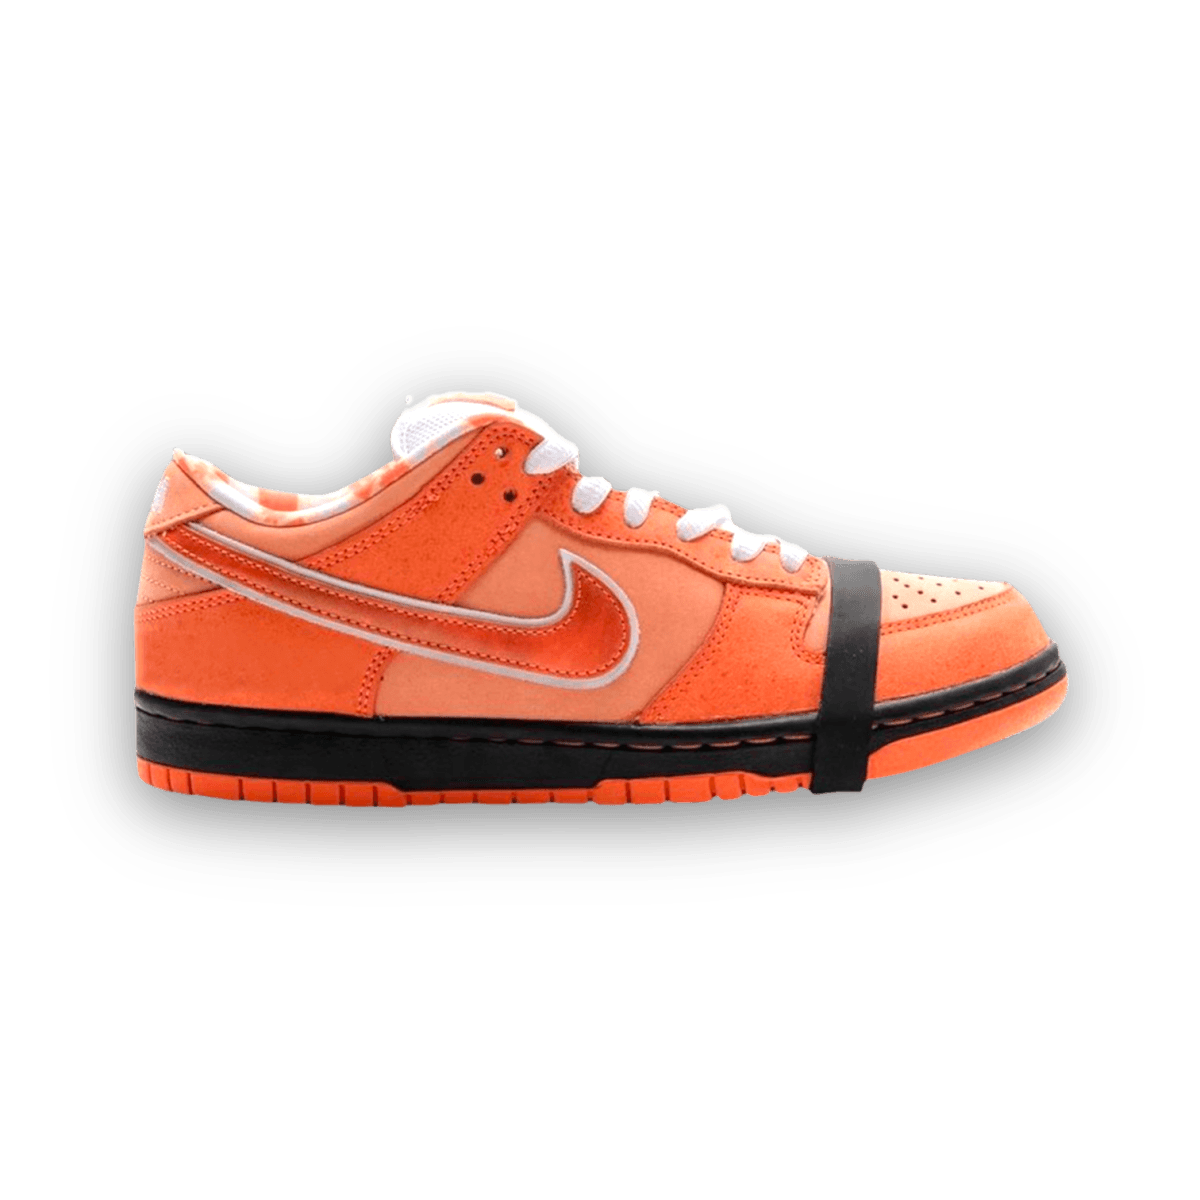 Concepts x Dunk Low - No Box SB 'Orange Lobster' - Jawns on Fire